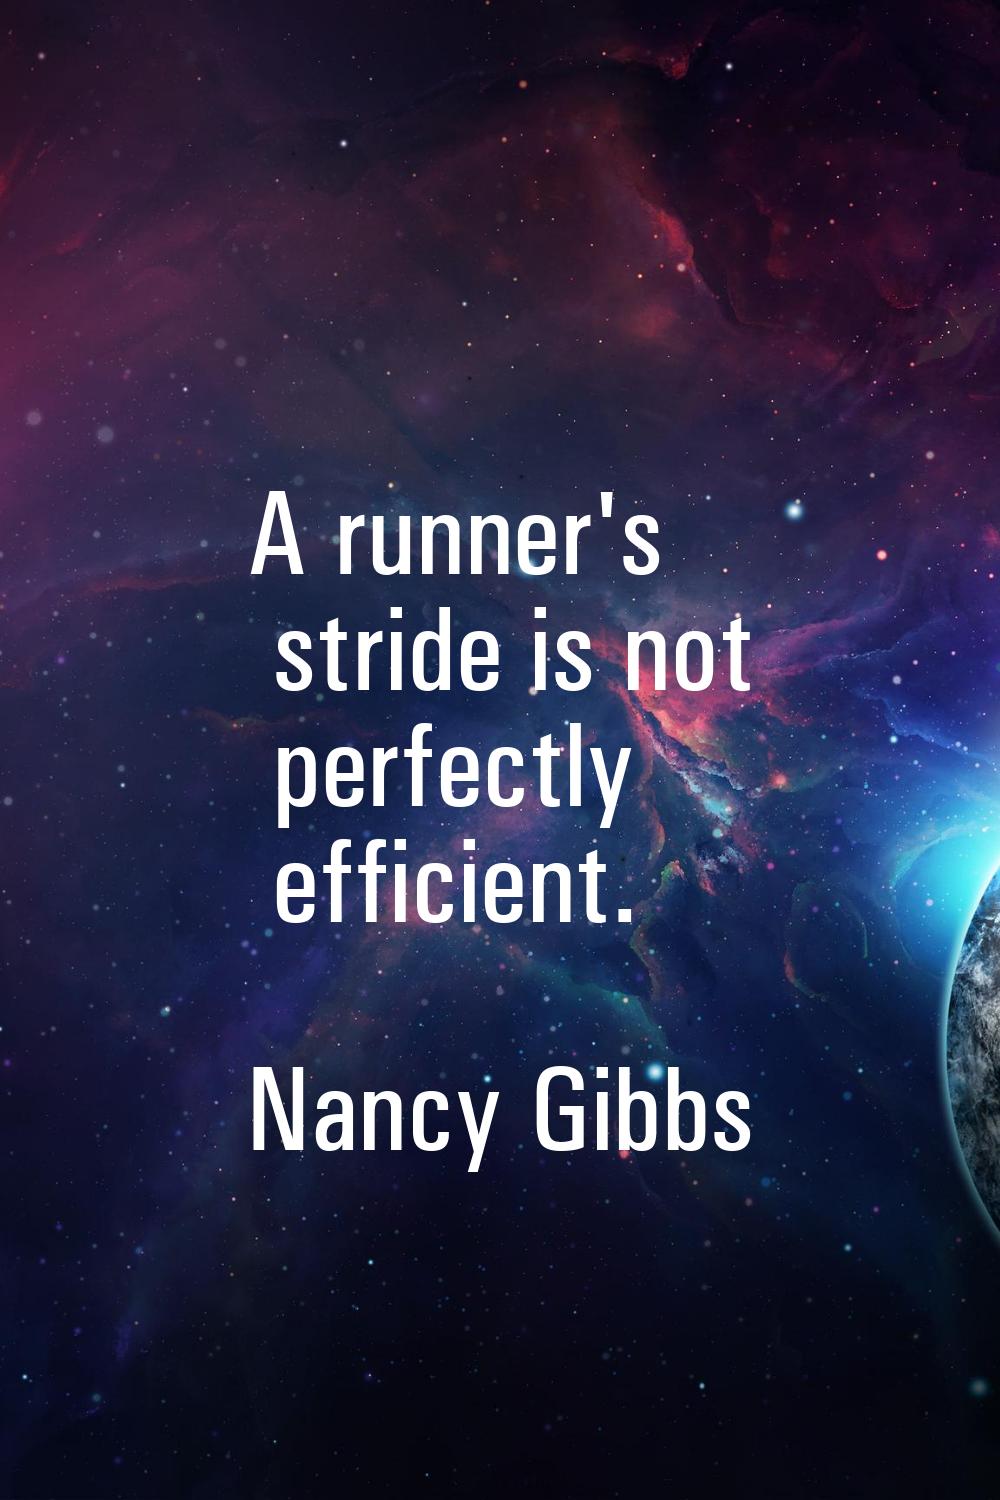 A runner's stride is not perfectly efficient.